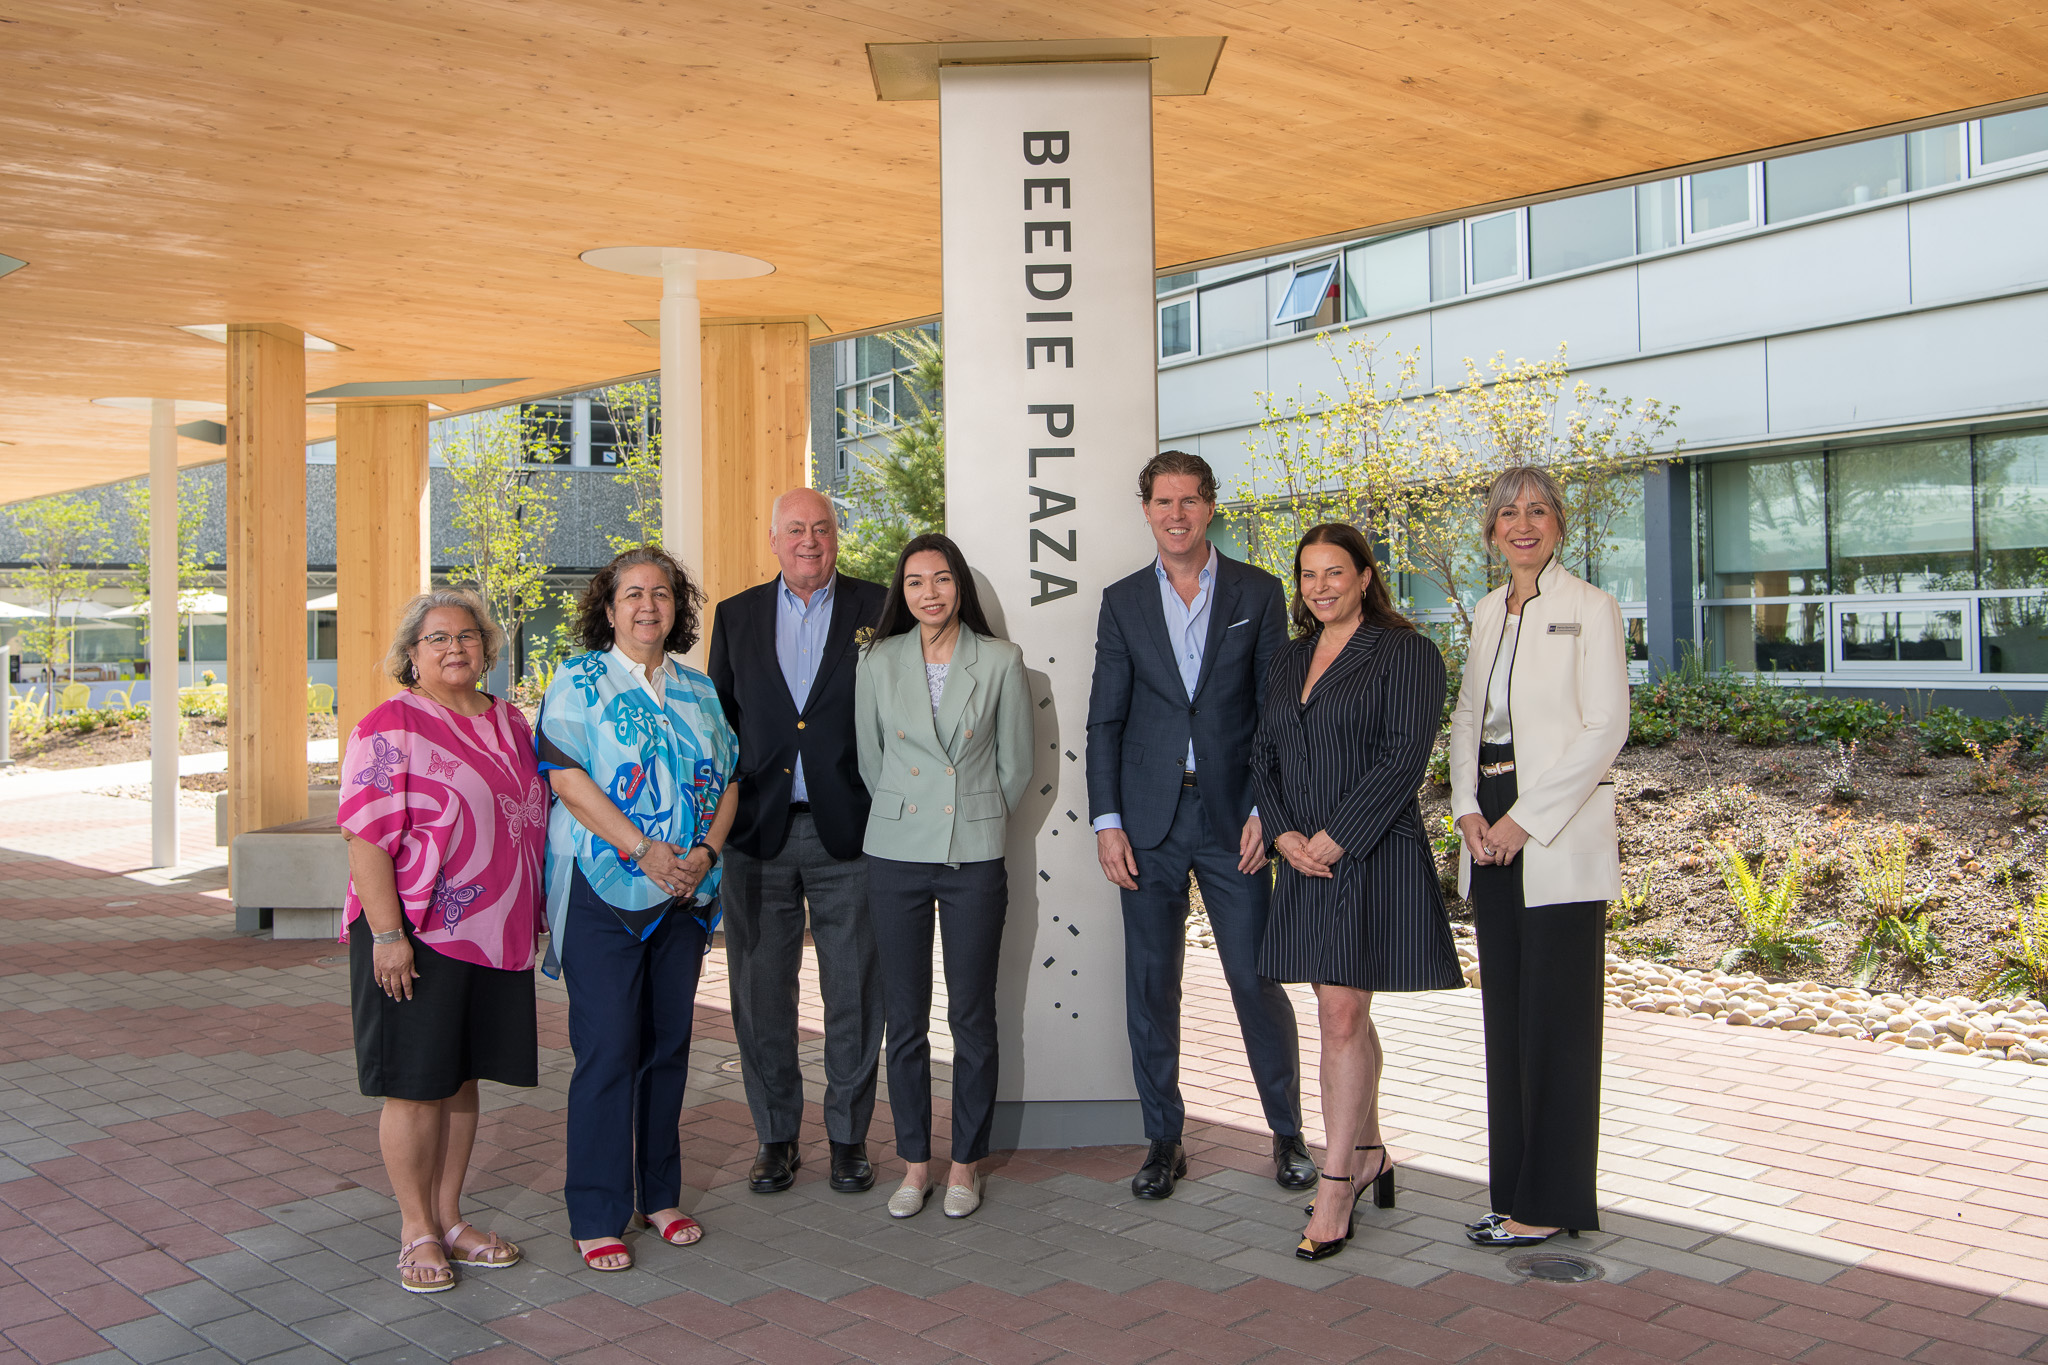 Seven people gather around the Beedie Plaza pillar to celebrate the unveiling of the new Beedie Plaza at the BCIT Burnaby Campus.